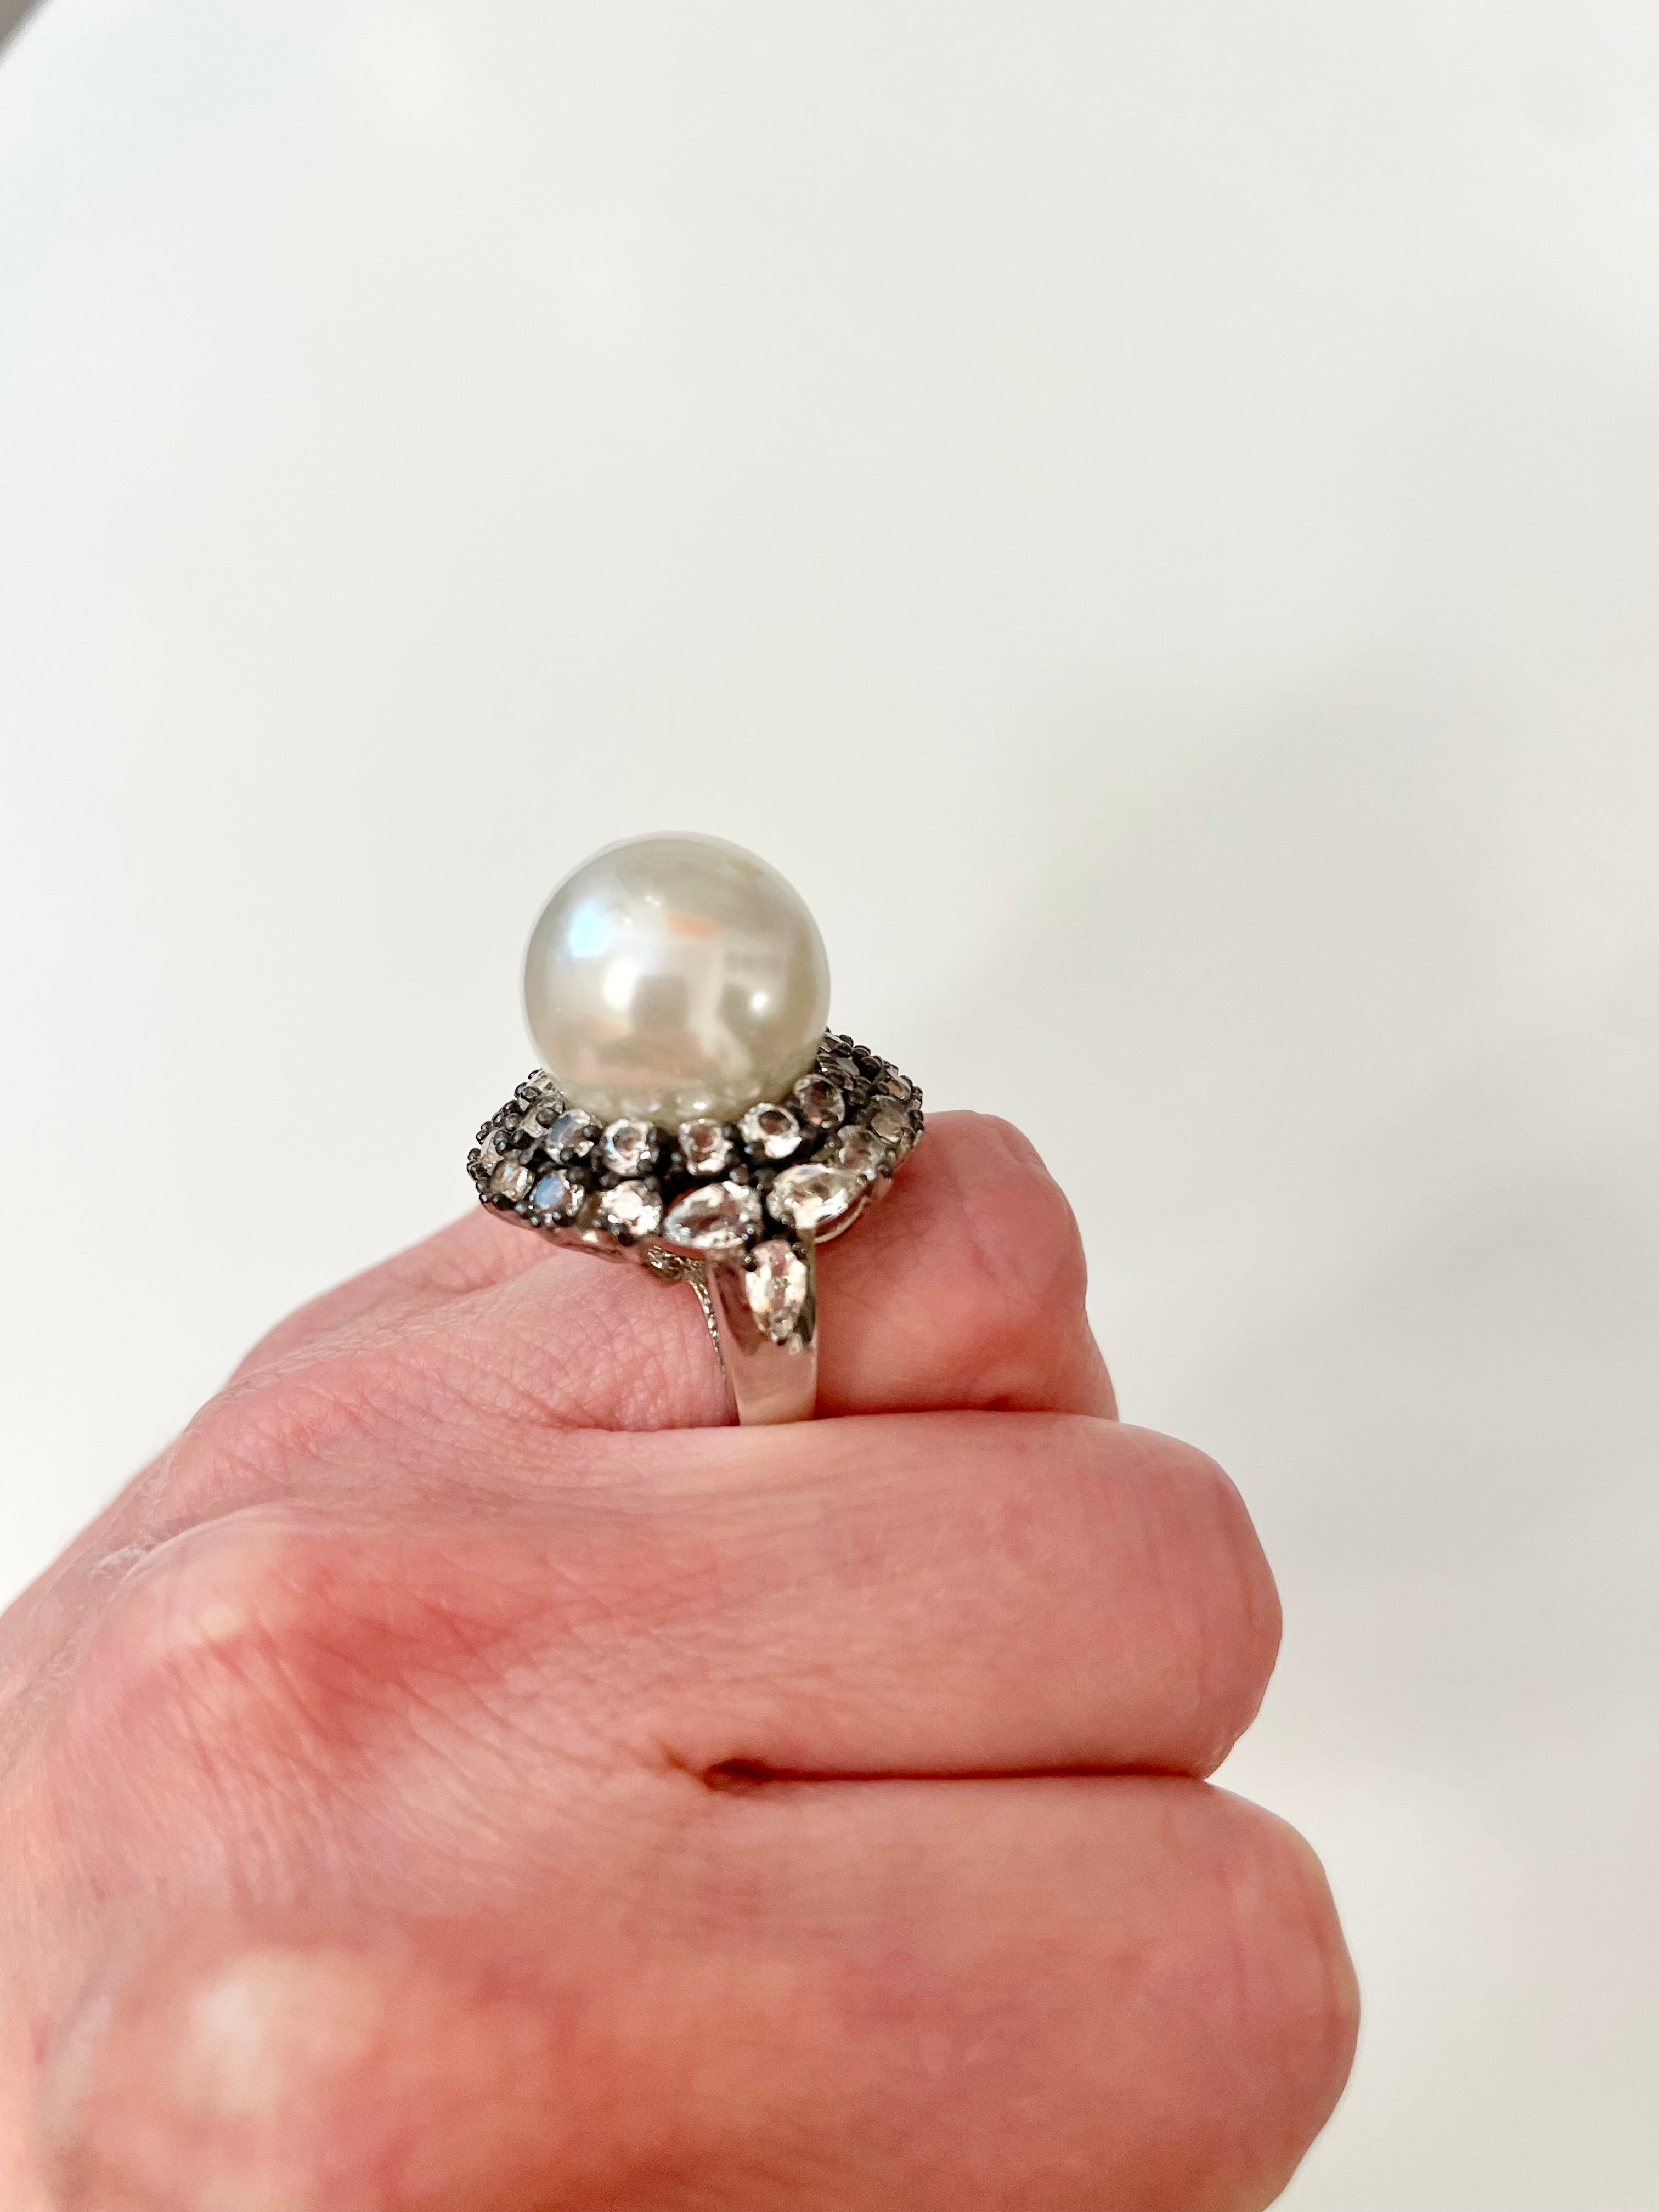 The charming martini large pearl cocktail ring.... so divine